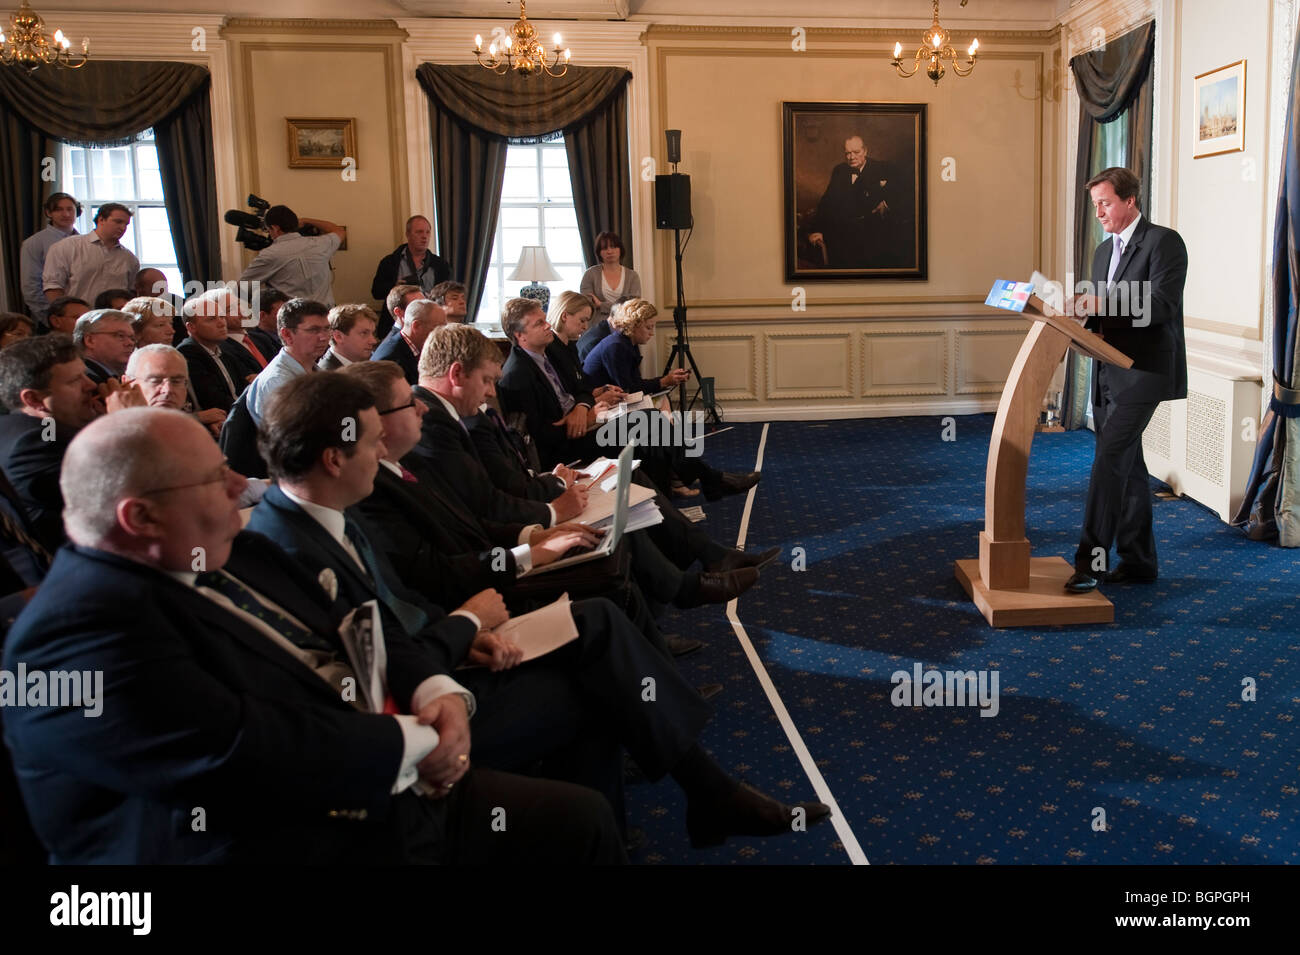 Conservative Party leader David Cameron speaks at a press conference Stock Photo